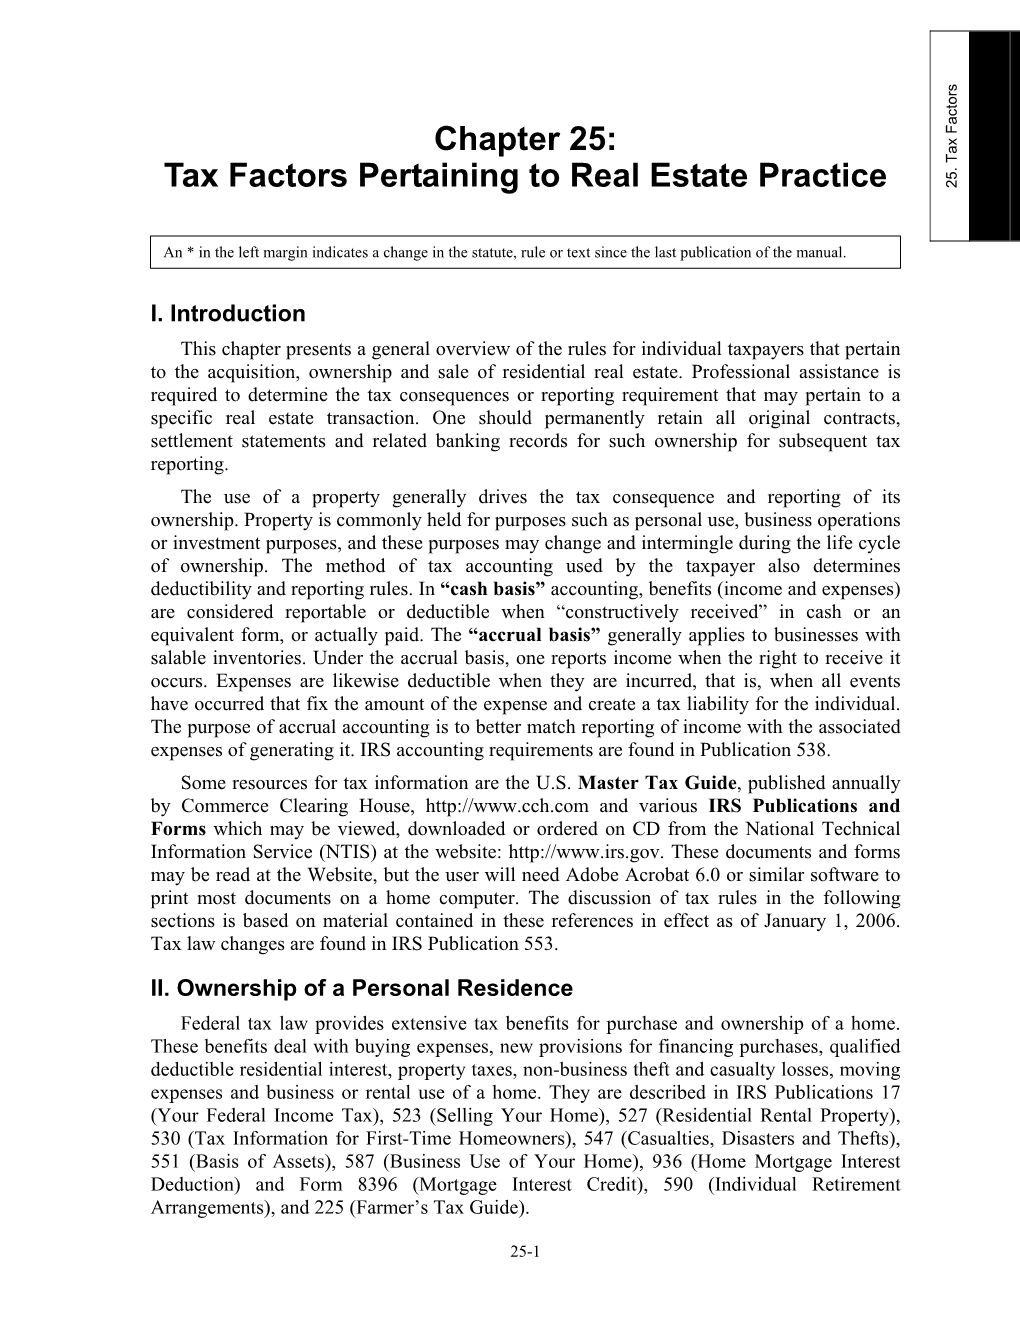 Tax Factors Pertaining to Real Estate Practice 25